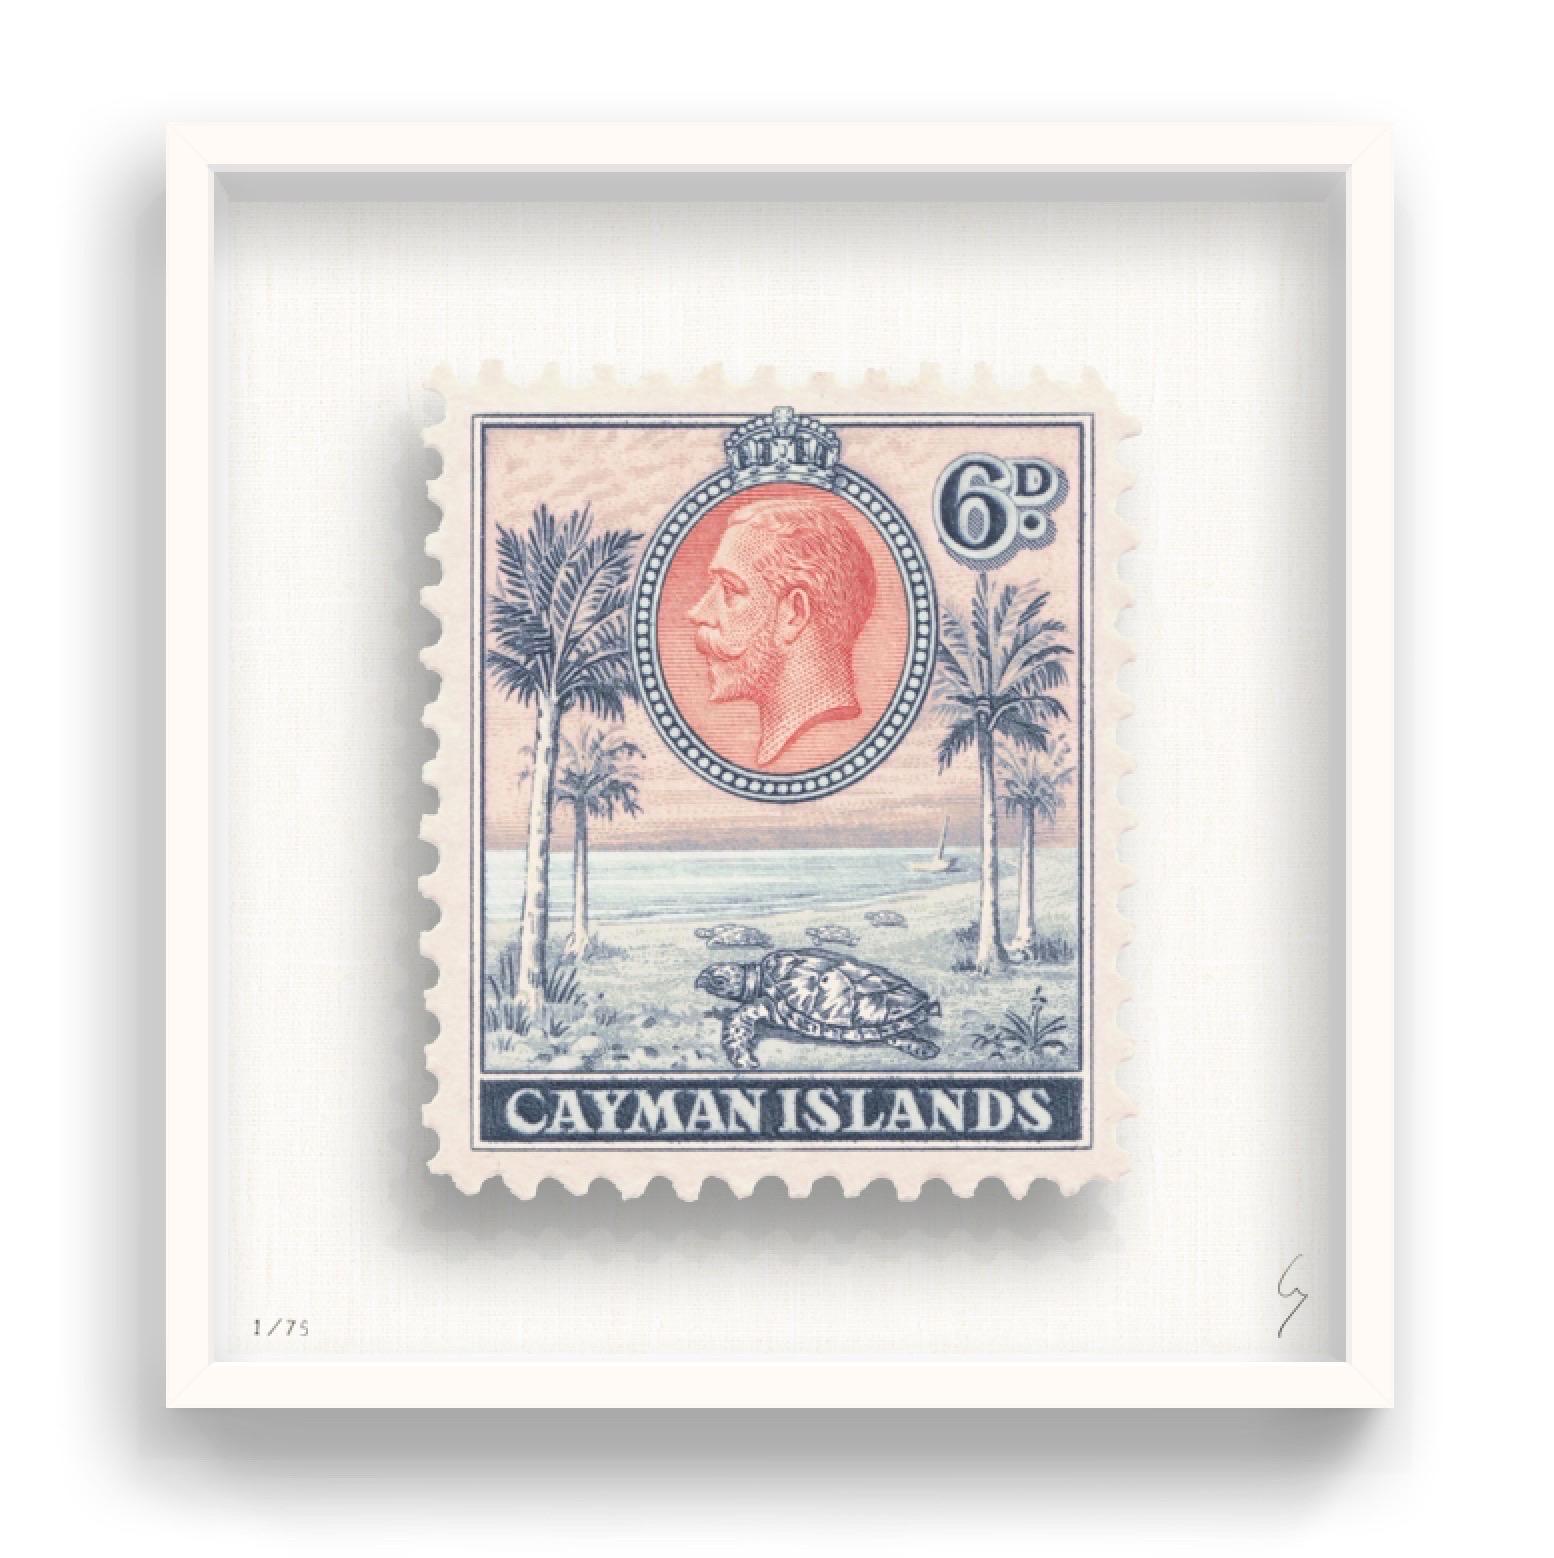 Guy Gee, Cayman Islands  (medium)

Hand-engraved print on 350gsm on G.F Smith card
53 x 56cm (20 4/5 x 22 2/5 in)
Frame included 
Edition of 75 

Each artwork by Guy had been digitally reimagined from an original postage stamp. Cut out and finished